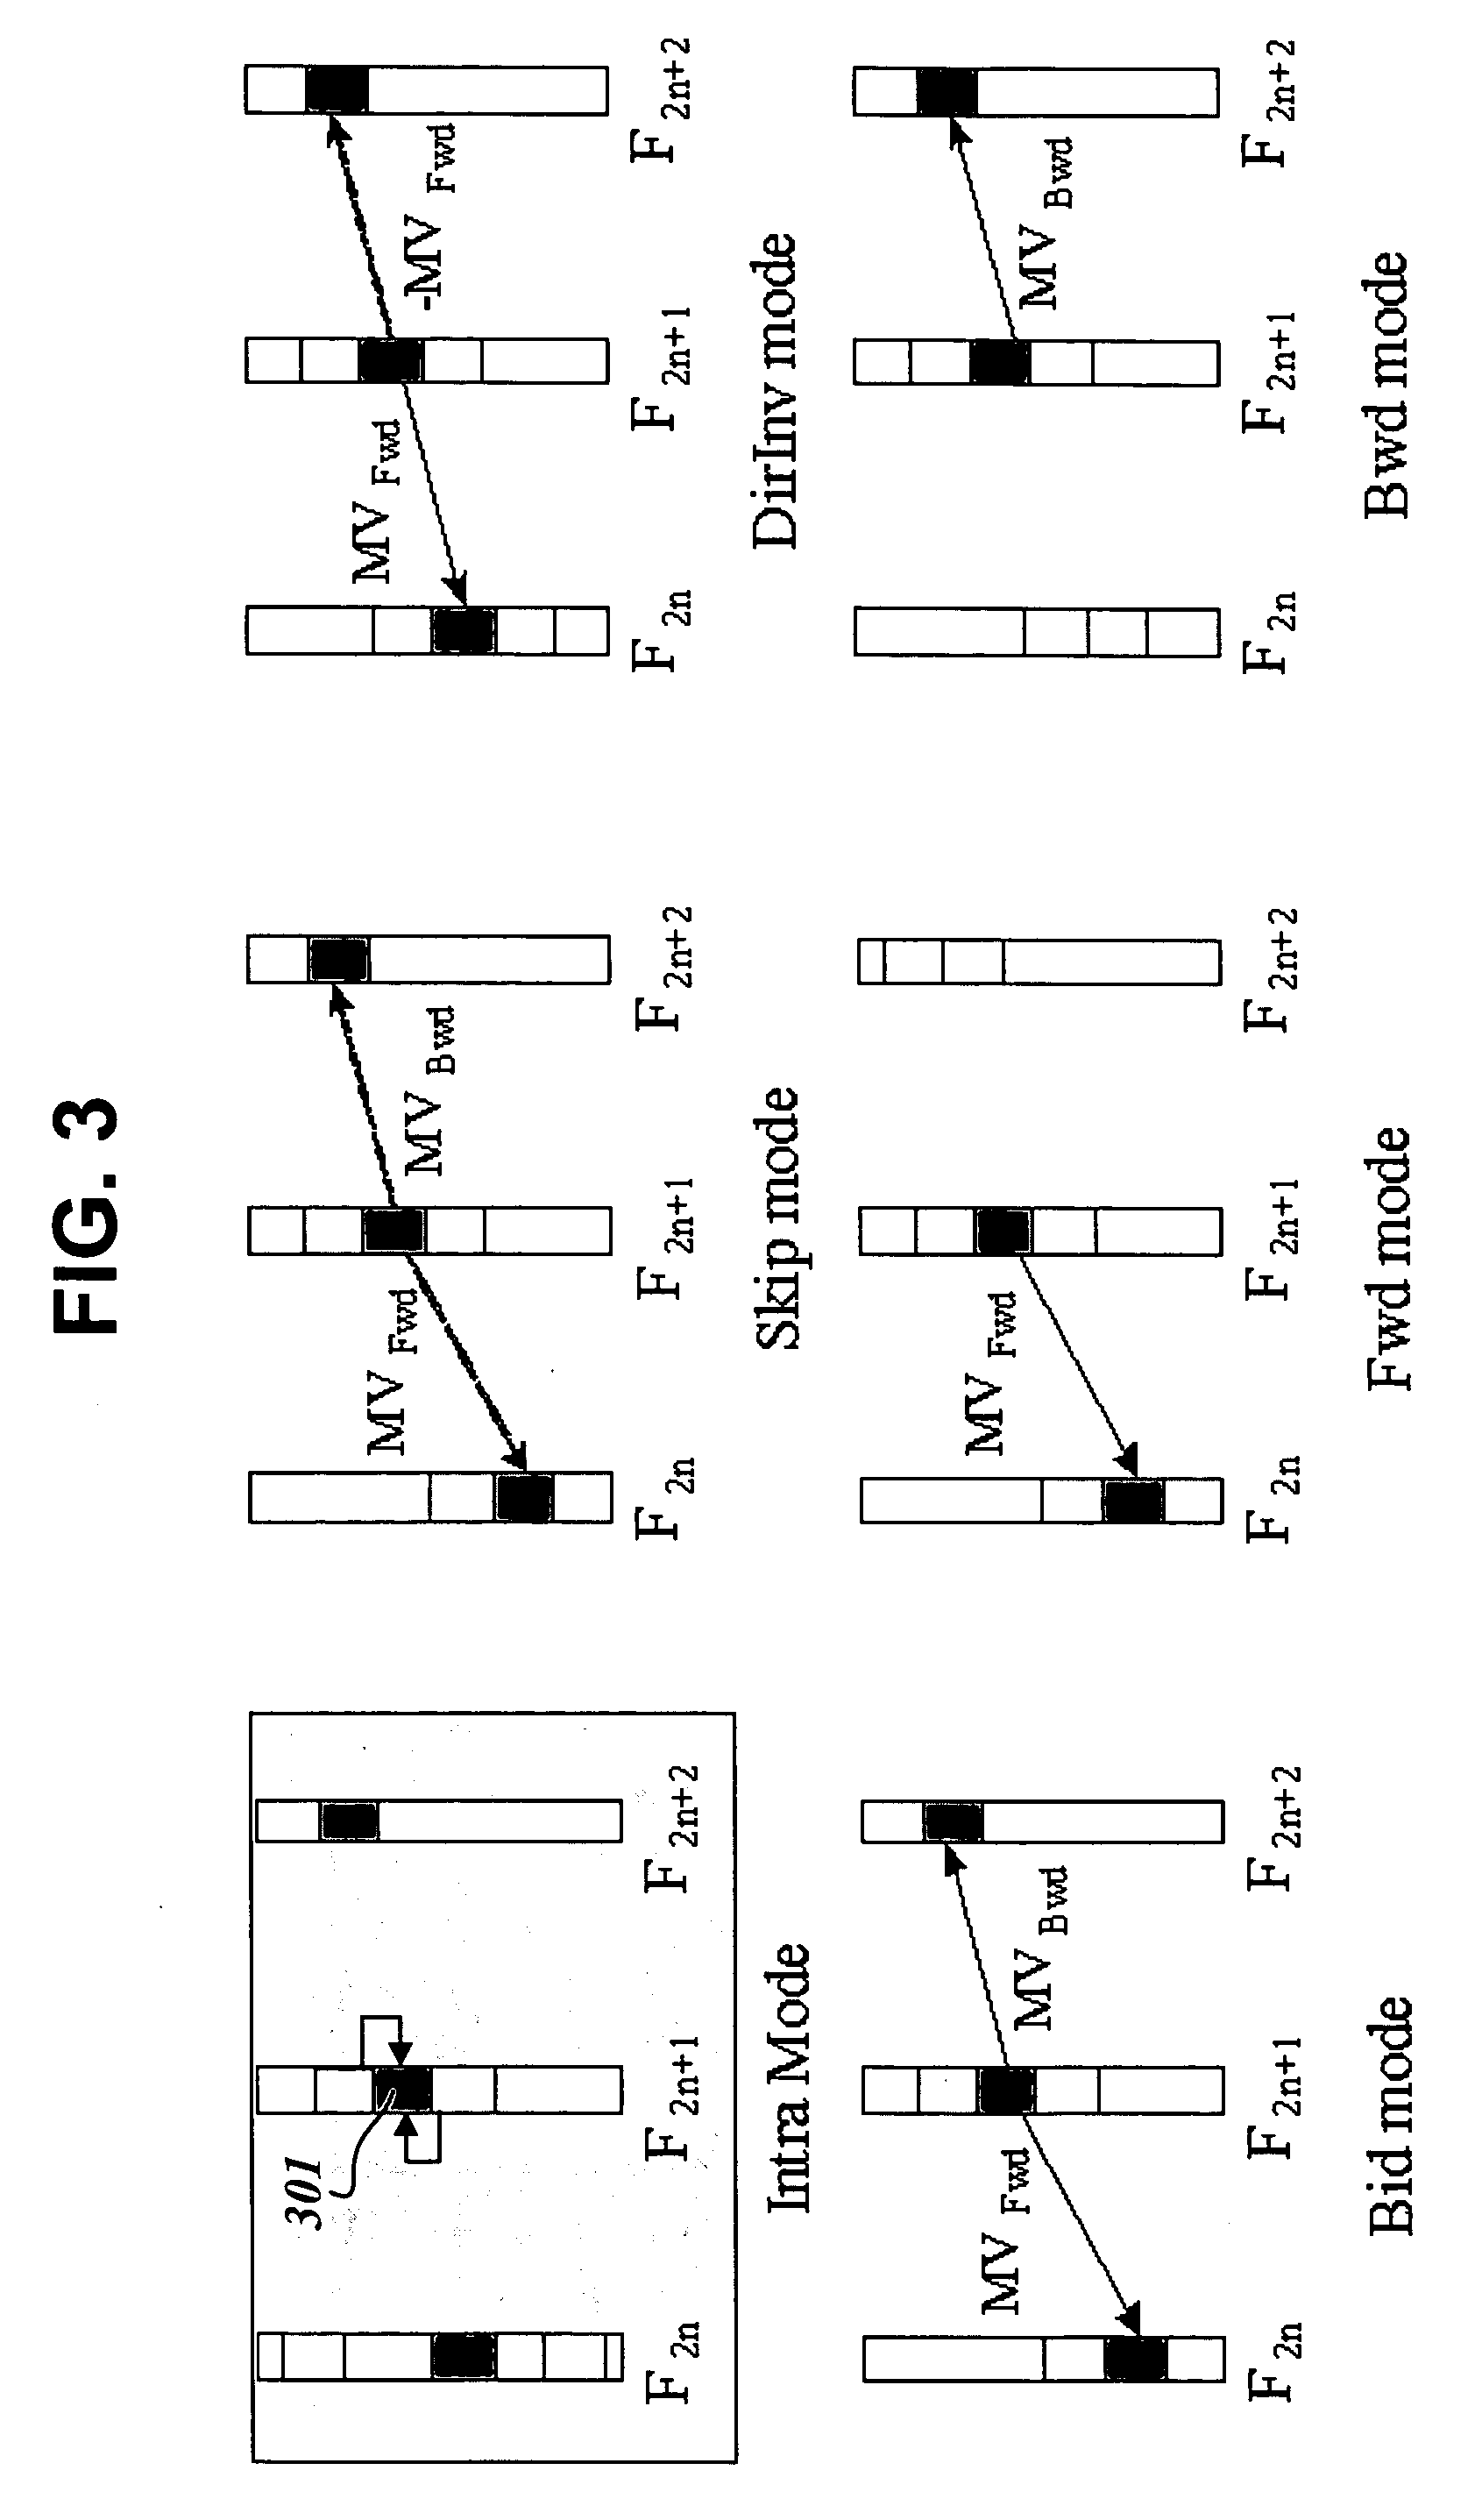 Method and device for encoding/decoding video signals using temporal and spatial correlations between macroblocks